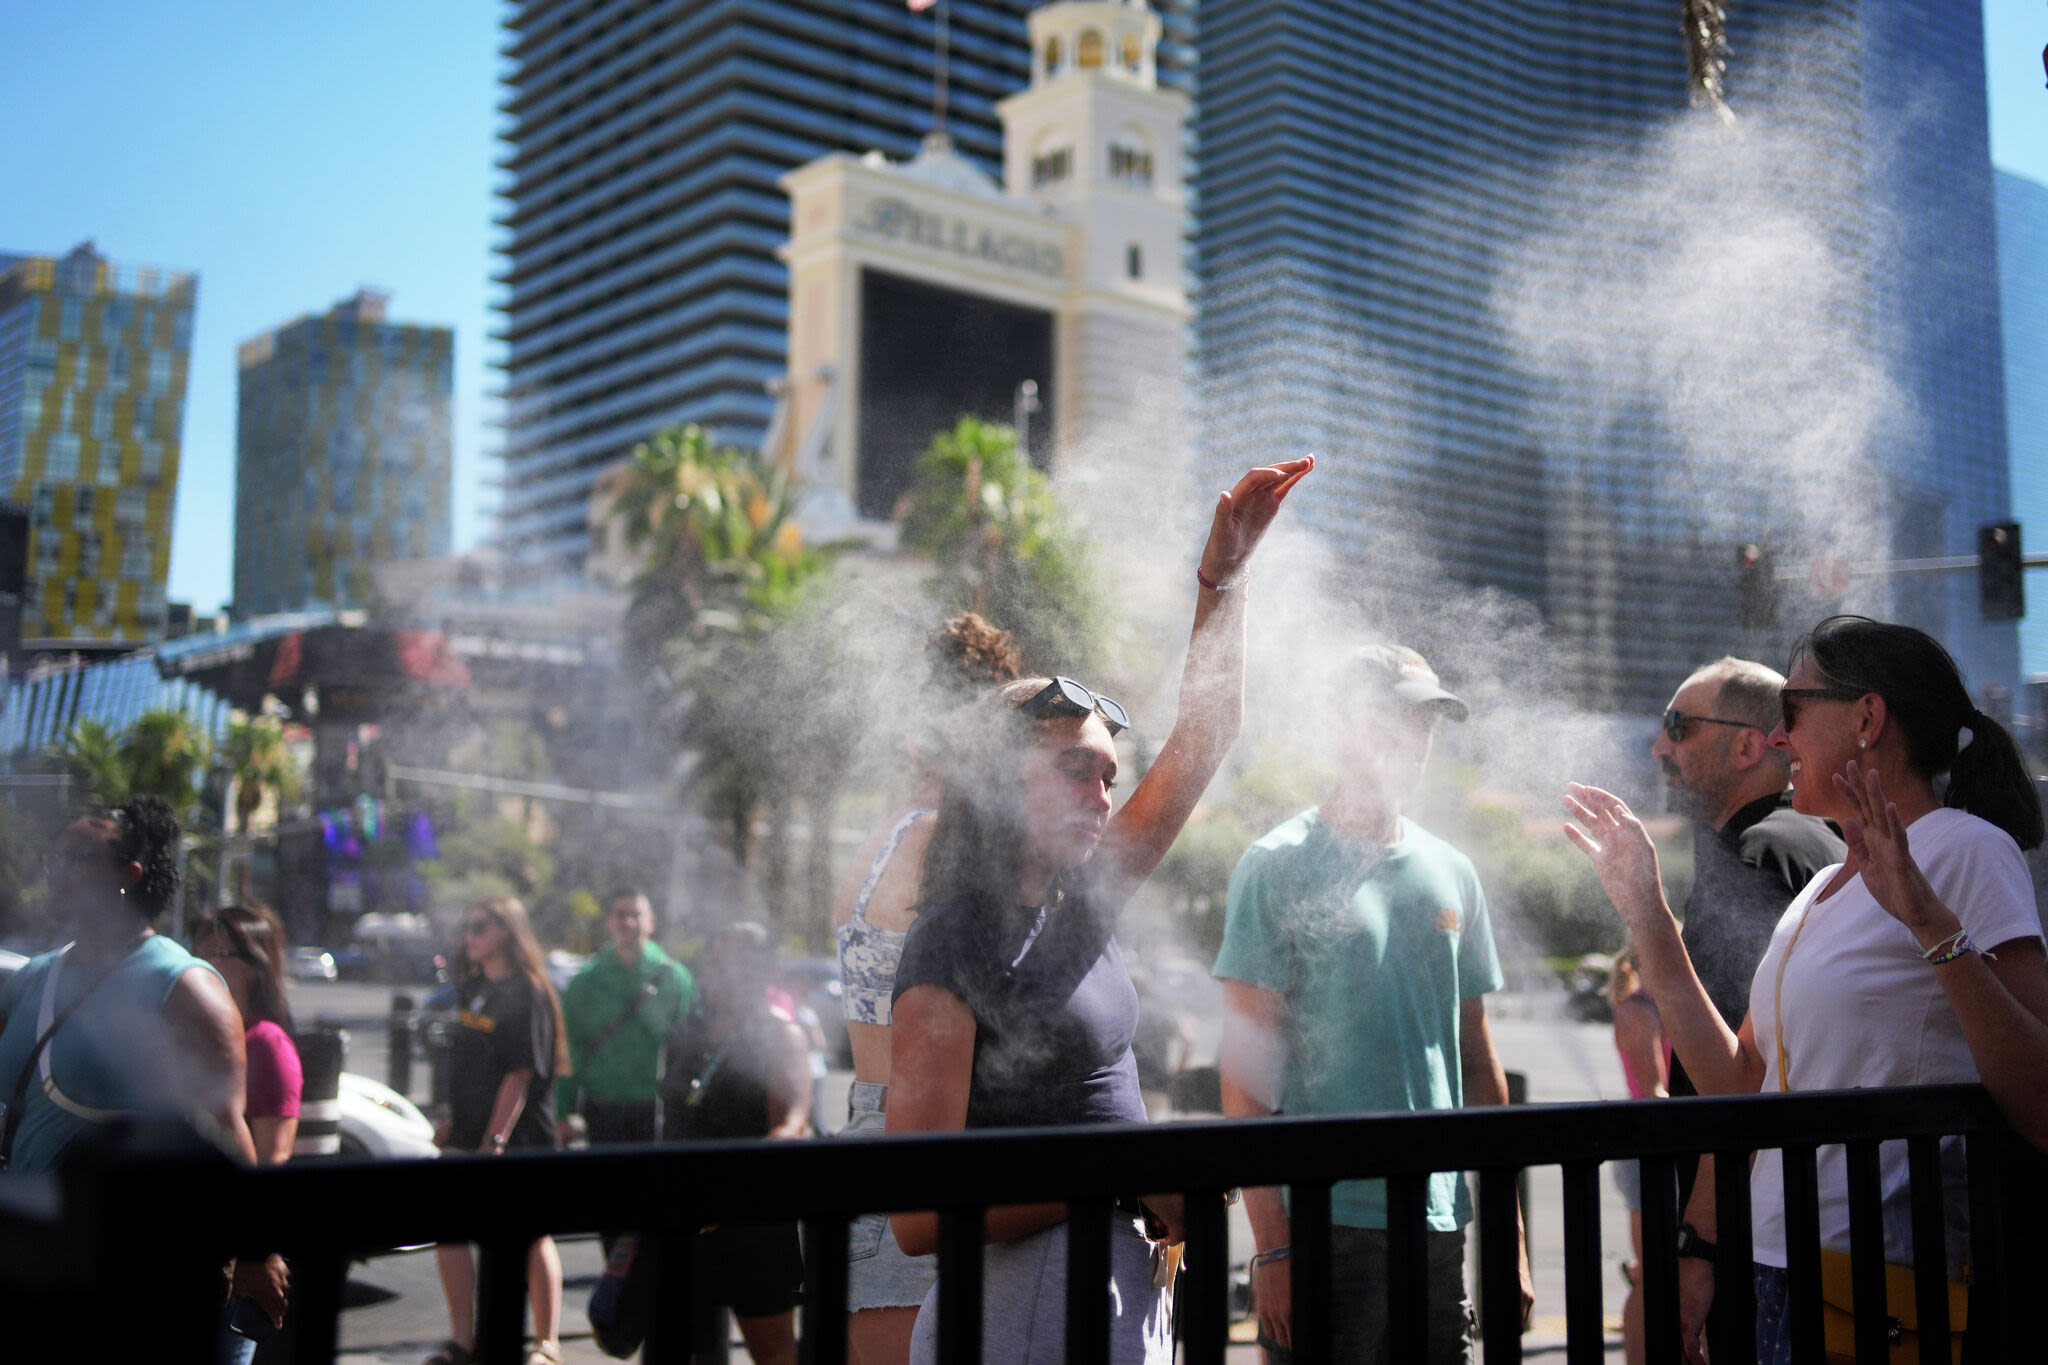 Las Vegas smashes all-time record high temperature by 3 degrees